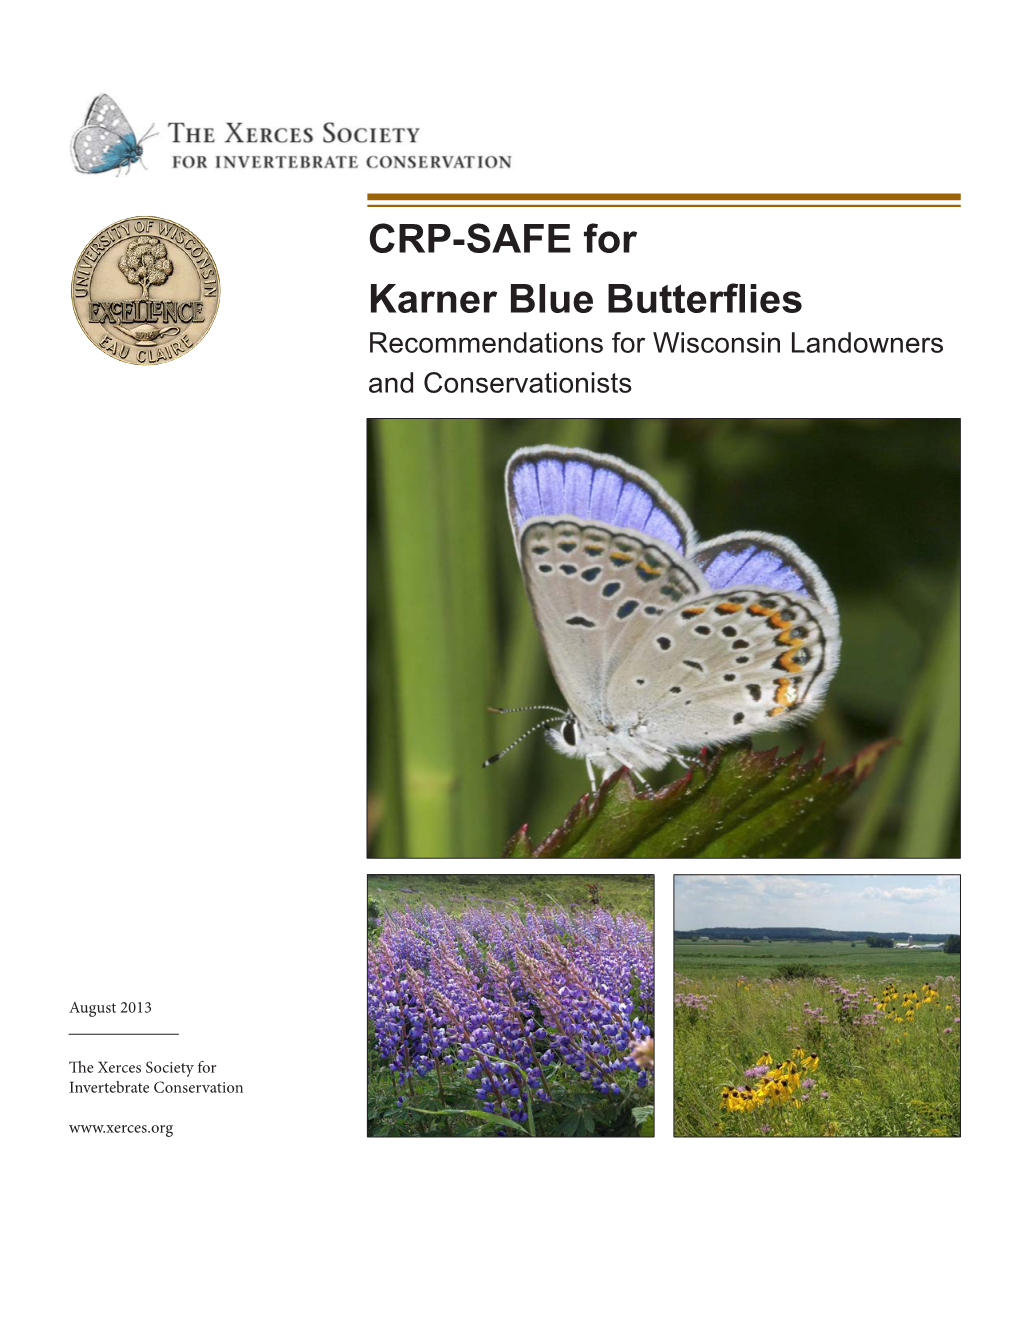 CRP-SAFE for Karner Blue Butterflies Recommendations for Wisconsin Landowners and Conservationists